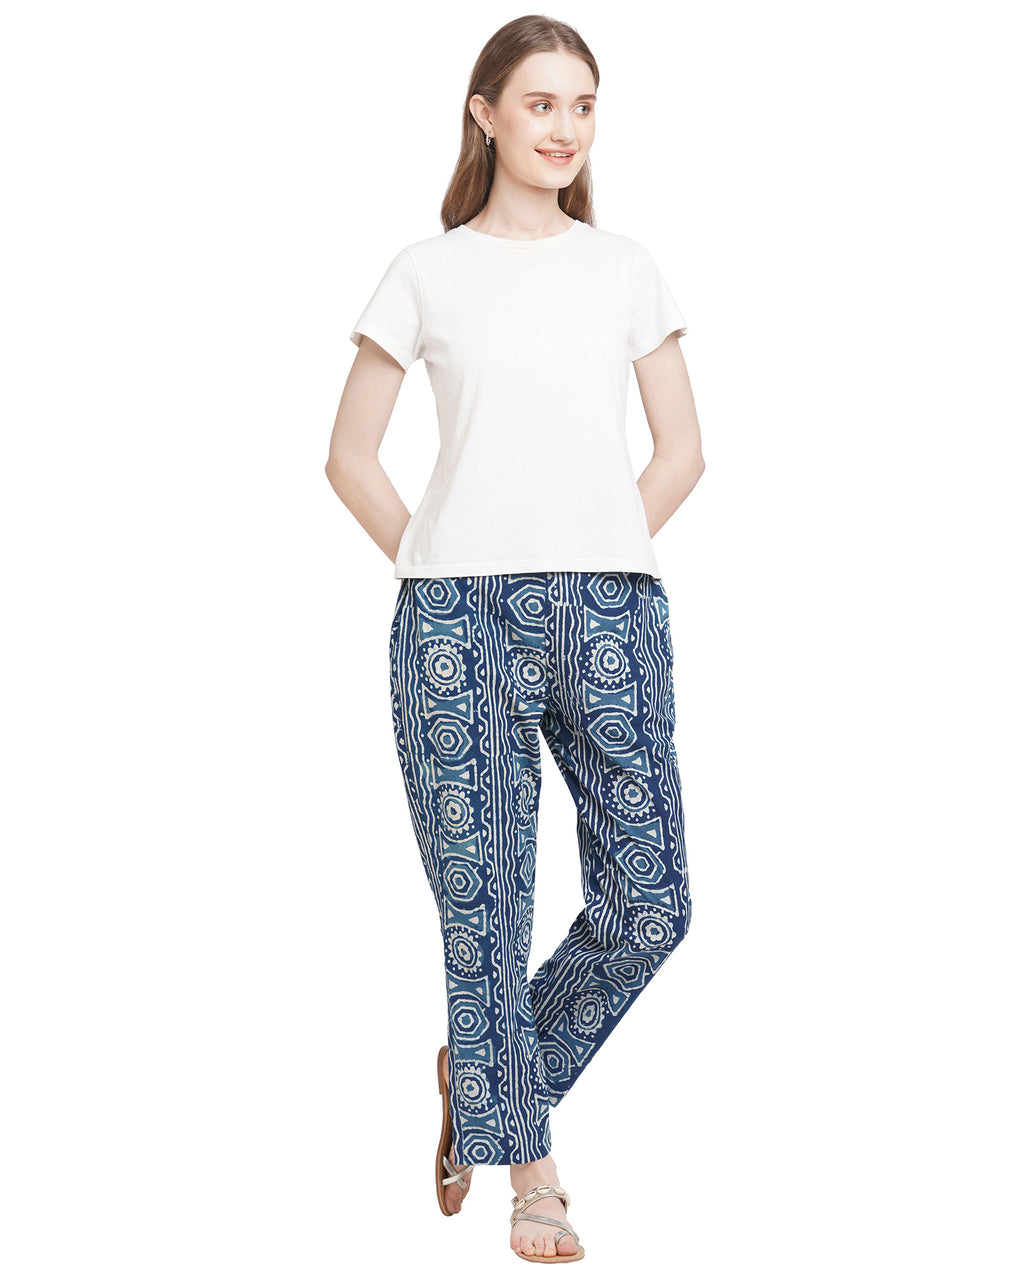 Neel charkha handcrafted cotton pants for women in  indigo